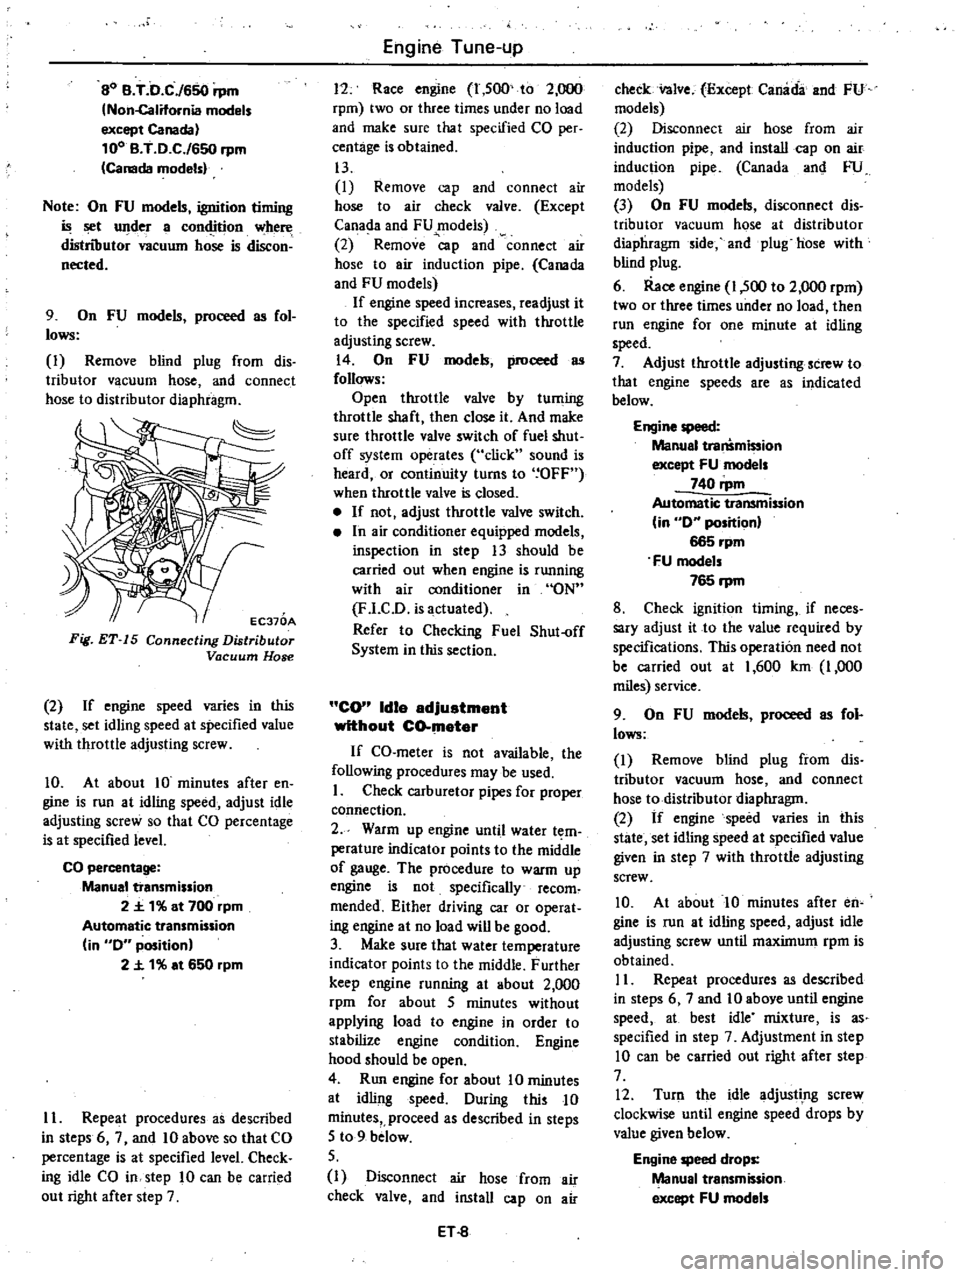 DATSUN 210 1979  Service Manual 
SO 
B 
T 
D 
C

650

rpm

Non
California 
models

except 
Canada

100 
B 
T 
0 
C 
650

rpm

Canada 
models

Note 
On 
FU

models

ignition 
timing

t 
under 
a

con4ition 
where

distnoutor

vacuum 